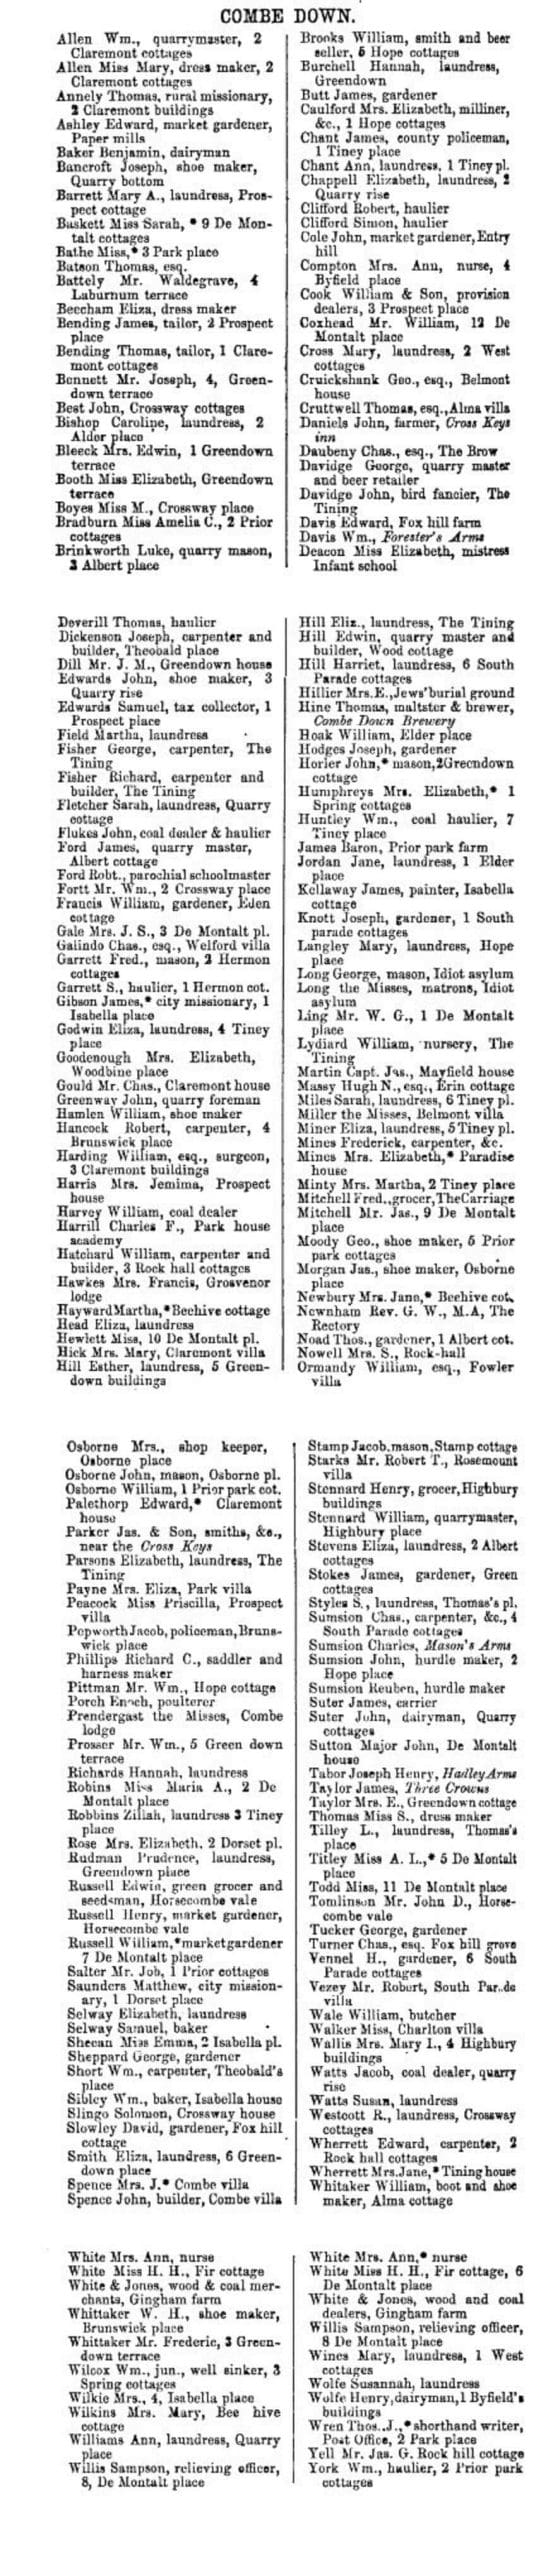 1864 - 65 Post Office Directory for Combe Down